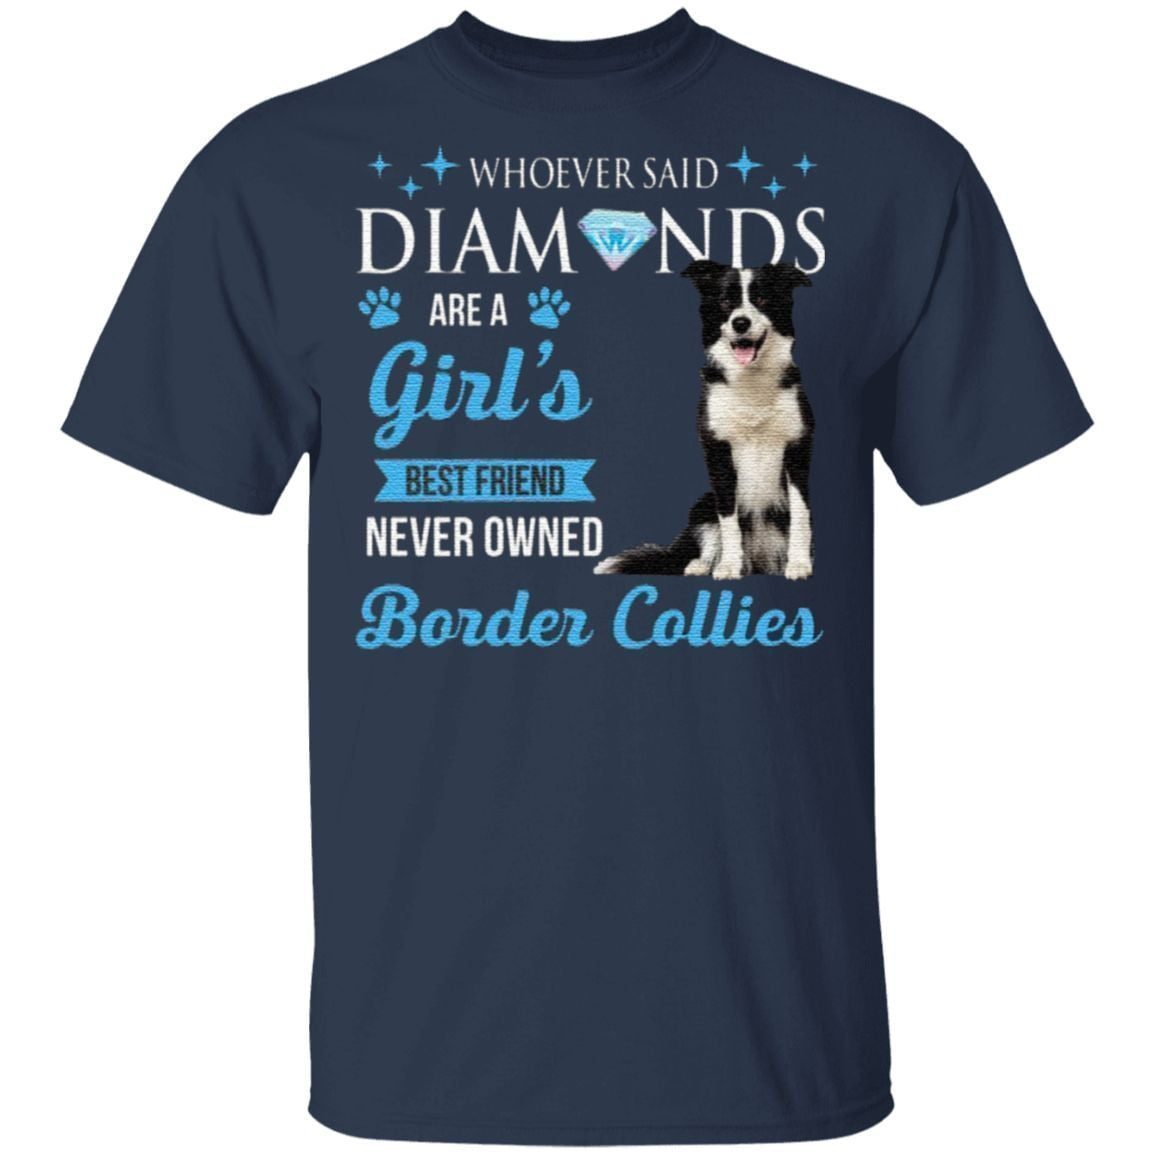 Whoever Said Diamonds Are A Girl’s Best Friend Never Owned Border Collies T Shirt